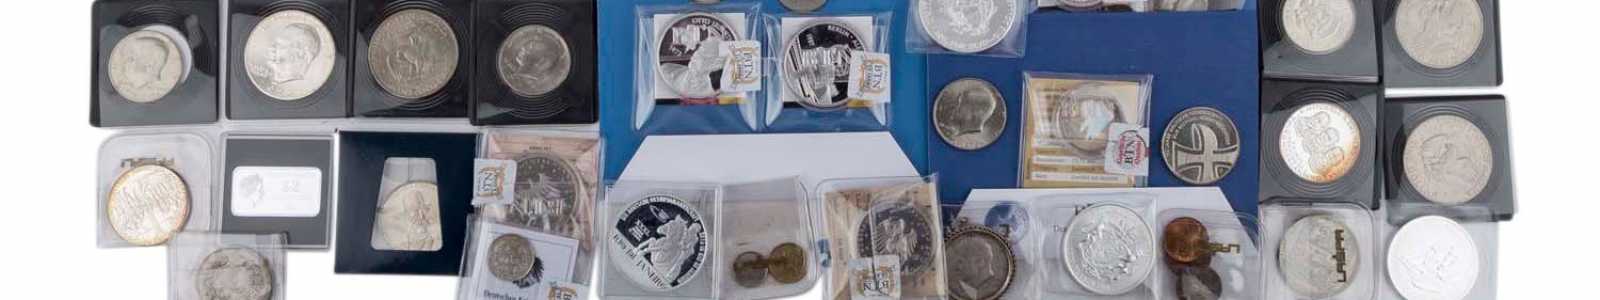 Coins, medals, stamps, history